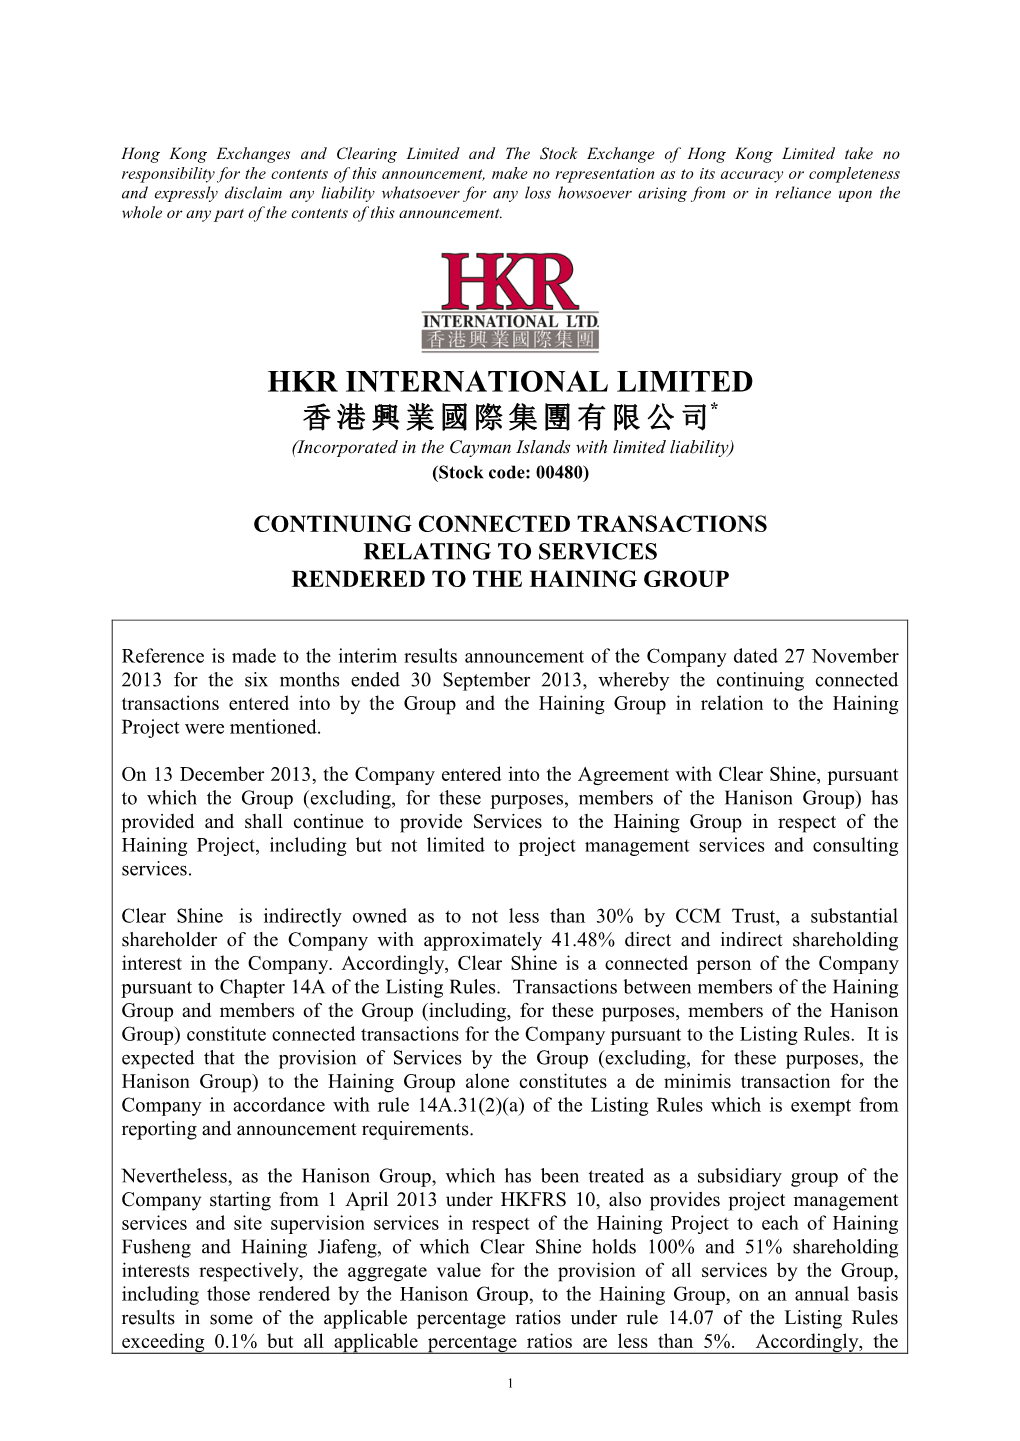 Continuing Connected Transactions Relating to Services Rendered to the Haining Group